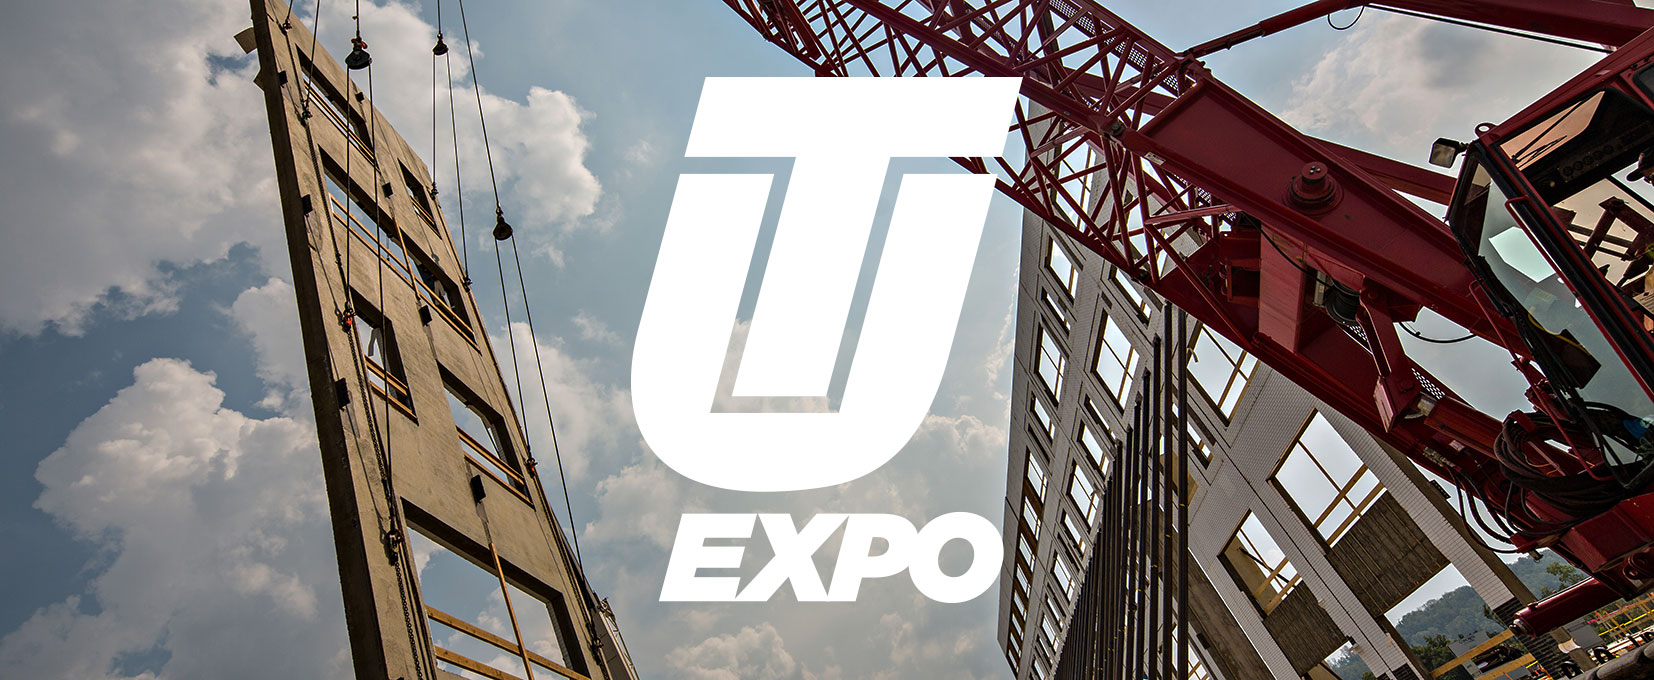 Tilt-Up Convention and Expo 2020 - Virtual